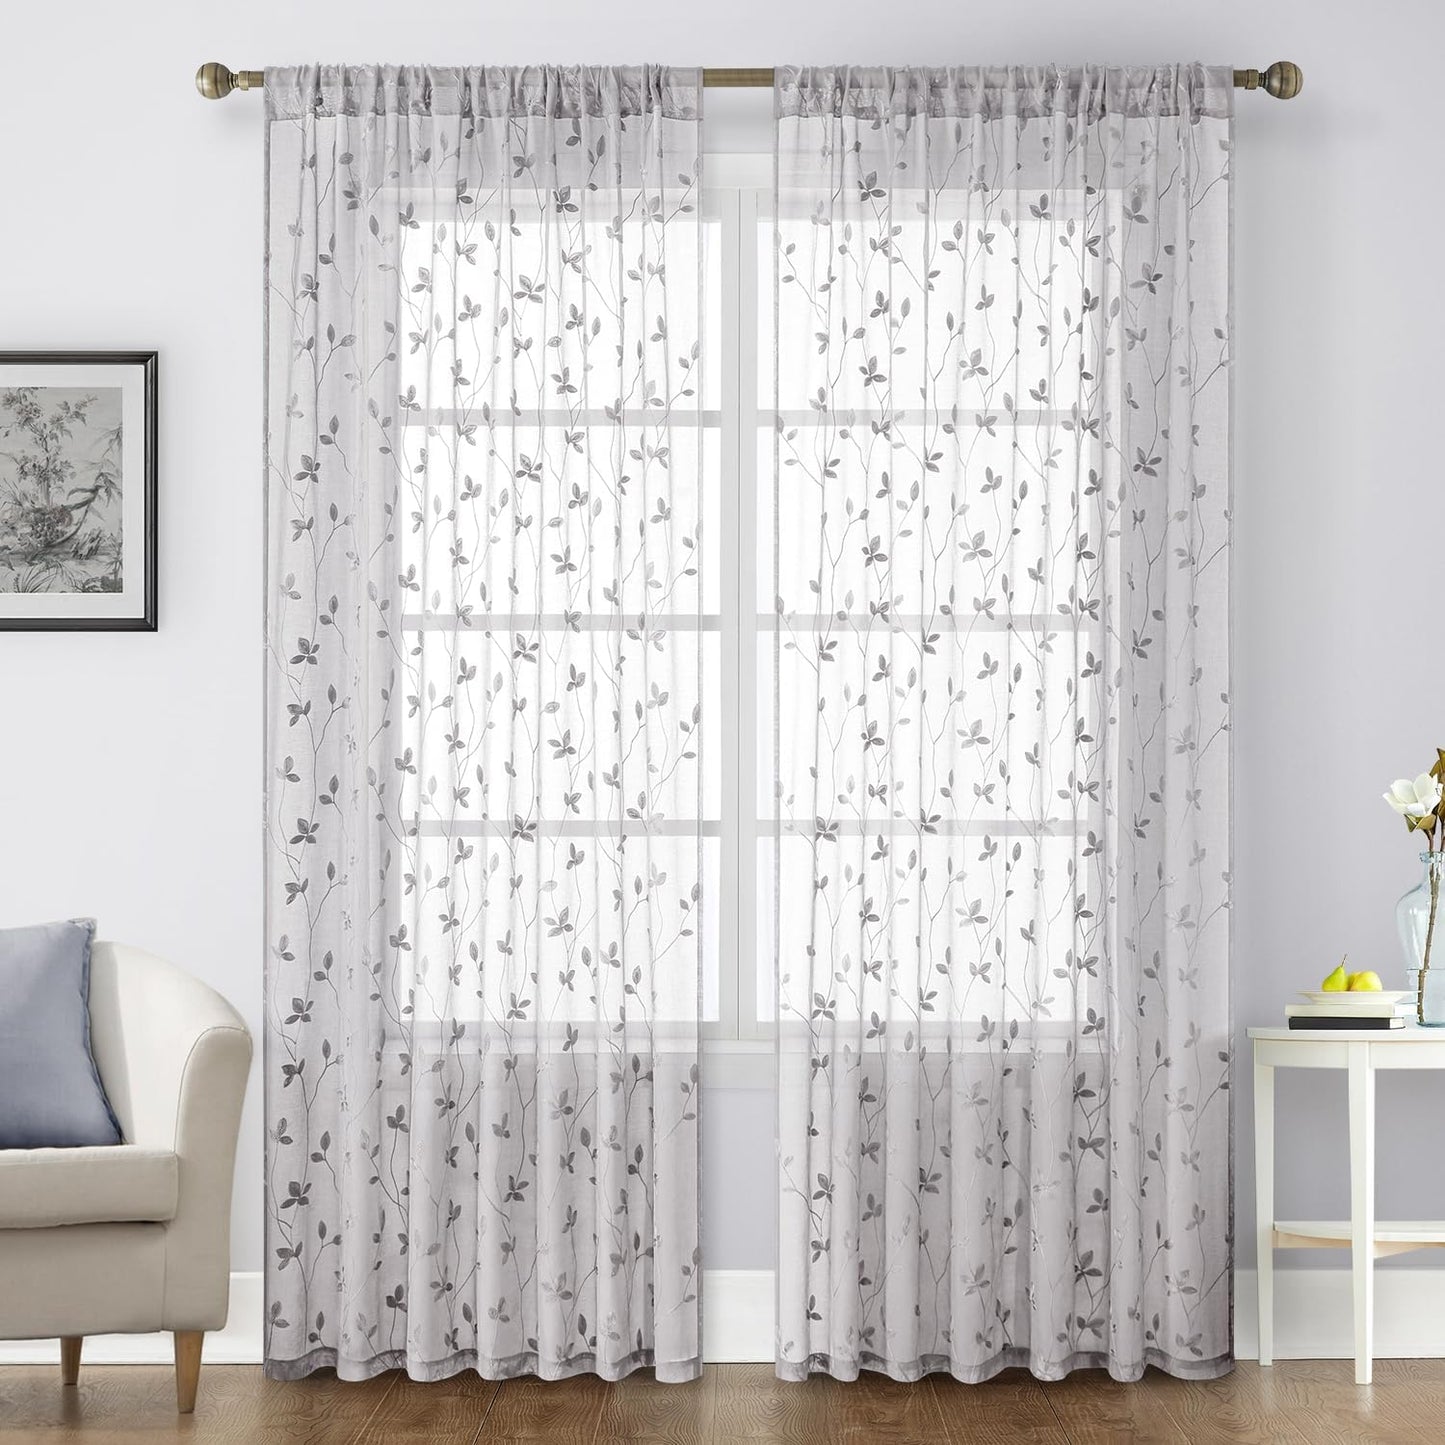 HOMEIDEAS Sage Green Sheer Curtains 52 X 63 Inches Length 2 Panels Embroidered Leaf Pattern Pocket Faux Linen Floral Semi Sheer Voile Window Curtains/Drapes for Bedroom Living Room  HOMEIDEAS Vine Light Grey W52" X L84" 